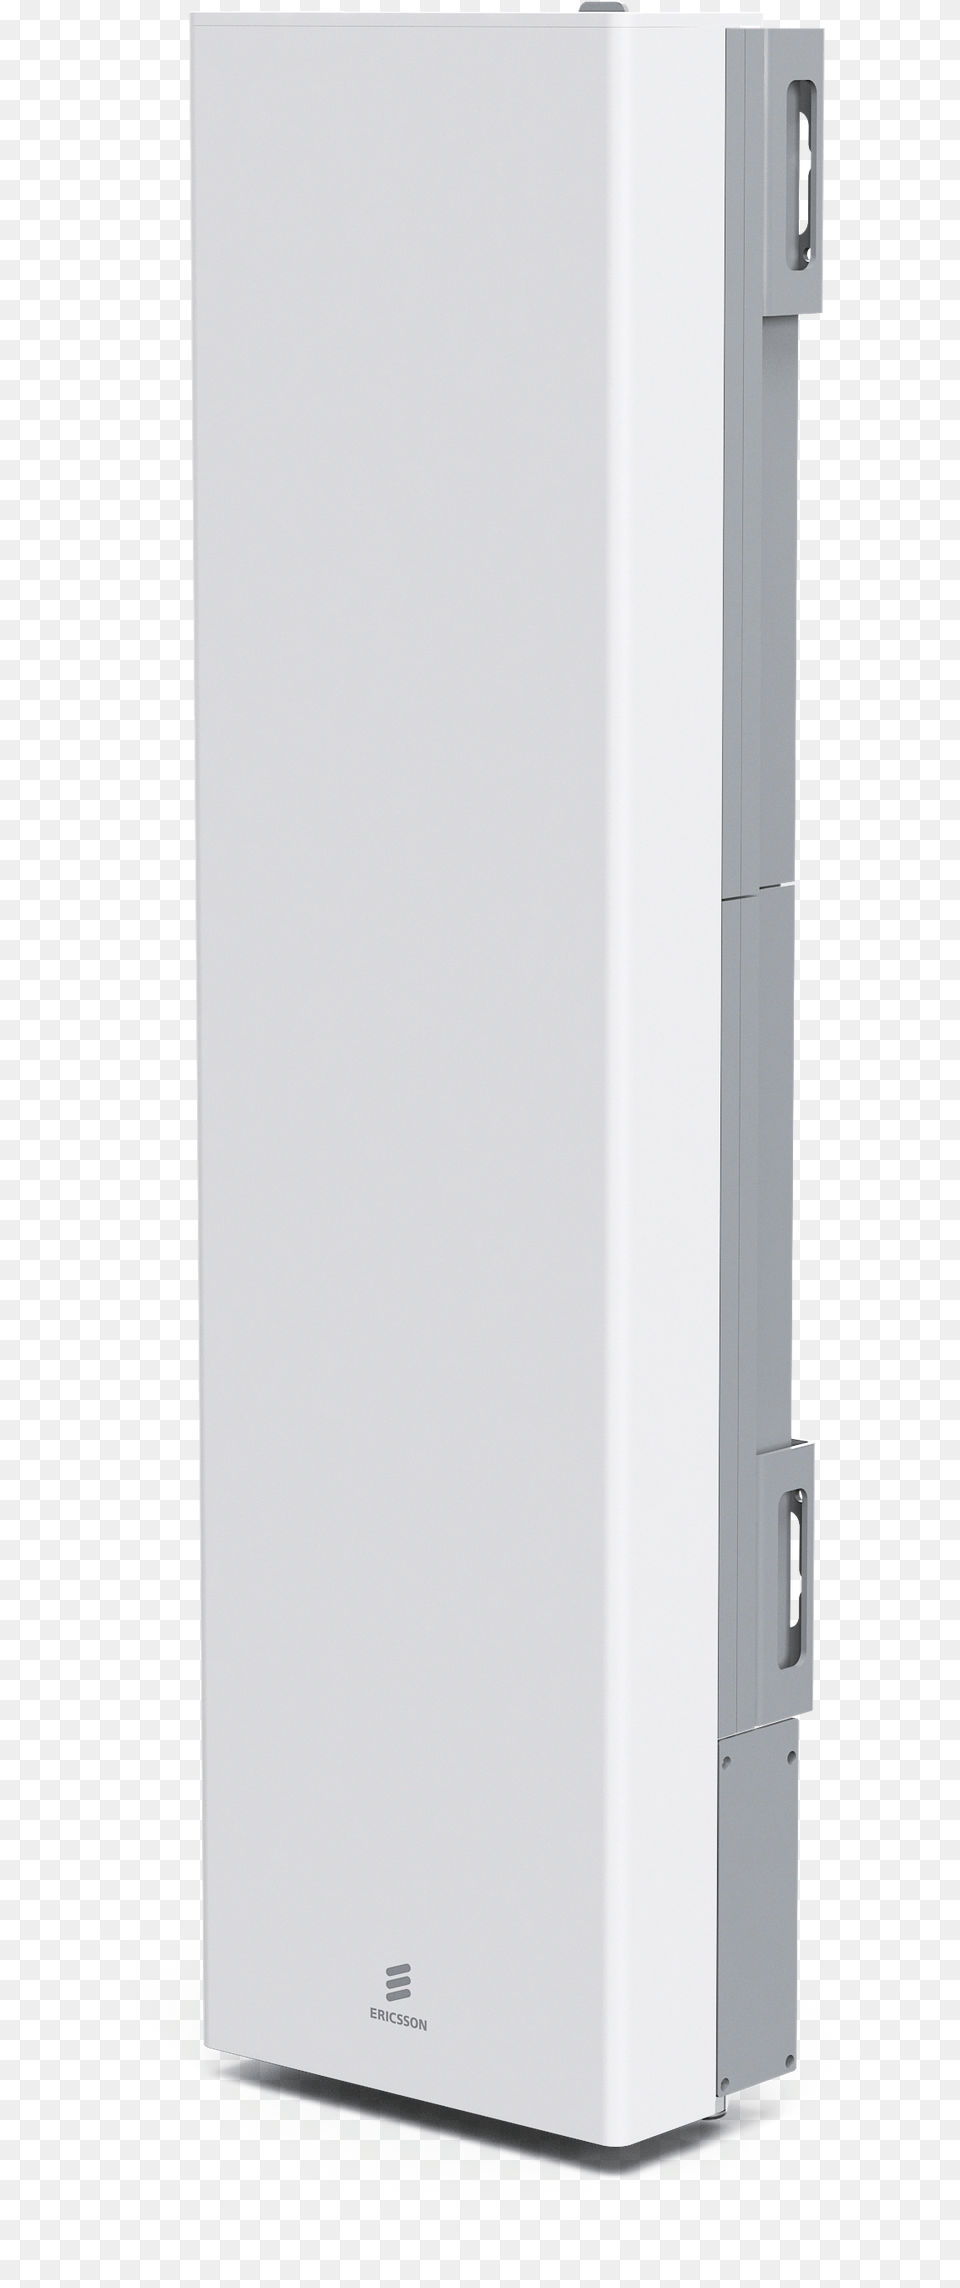 Ericsson Air 3246 B66 Specs, Device, Mailbox, Electrical Device, Appliance Png